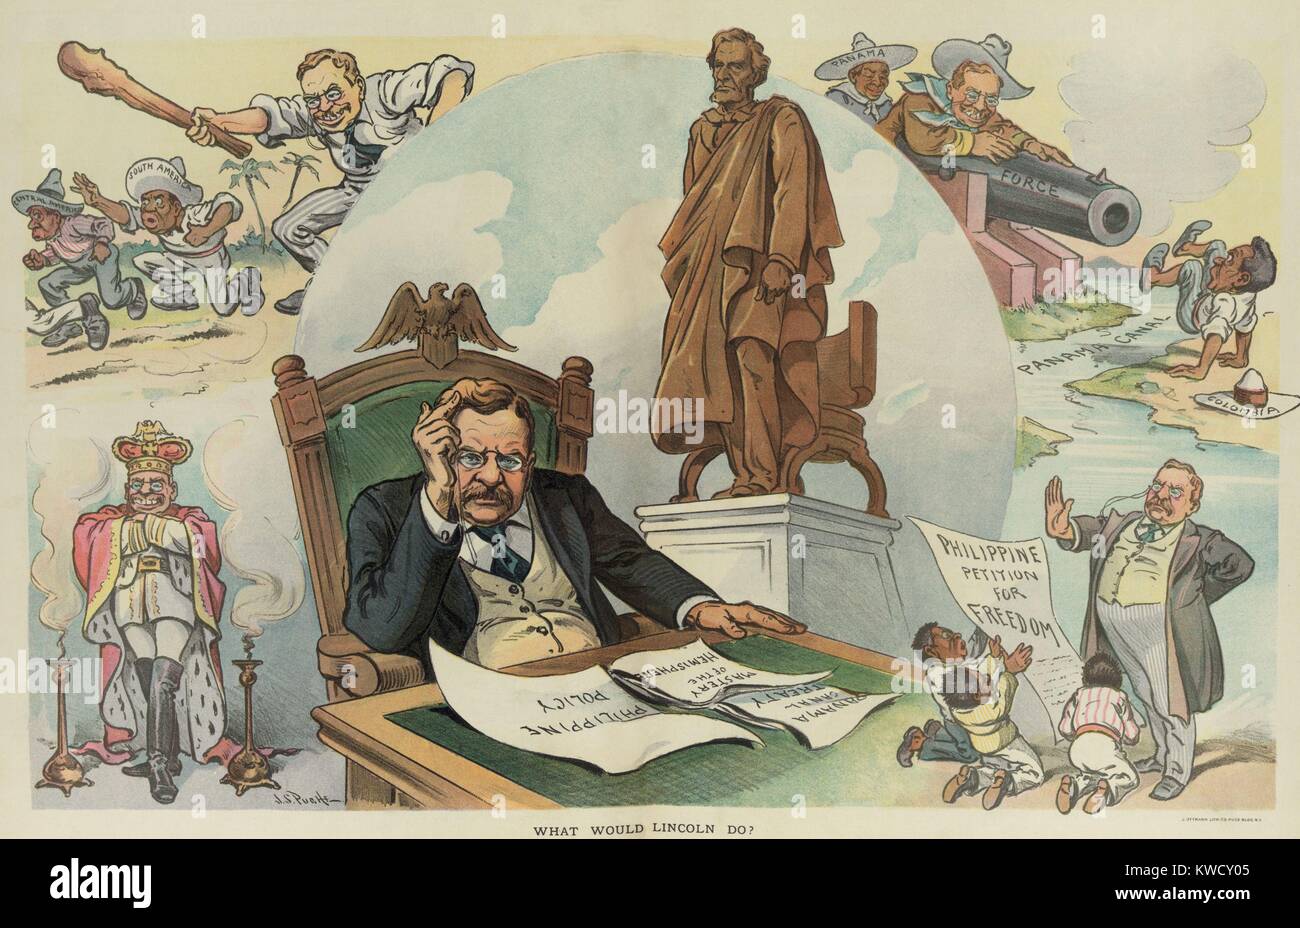 WHAT WOULD LINCOLN DO? PUCK Magazine cartoon of Sept. 28, 1905. Election year political cartoon critical of TRs imperialistic policies in the Philippines and Panama (BSLOC 2017 4 69) Stock Photo